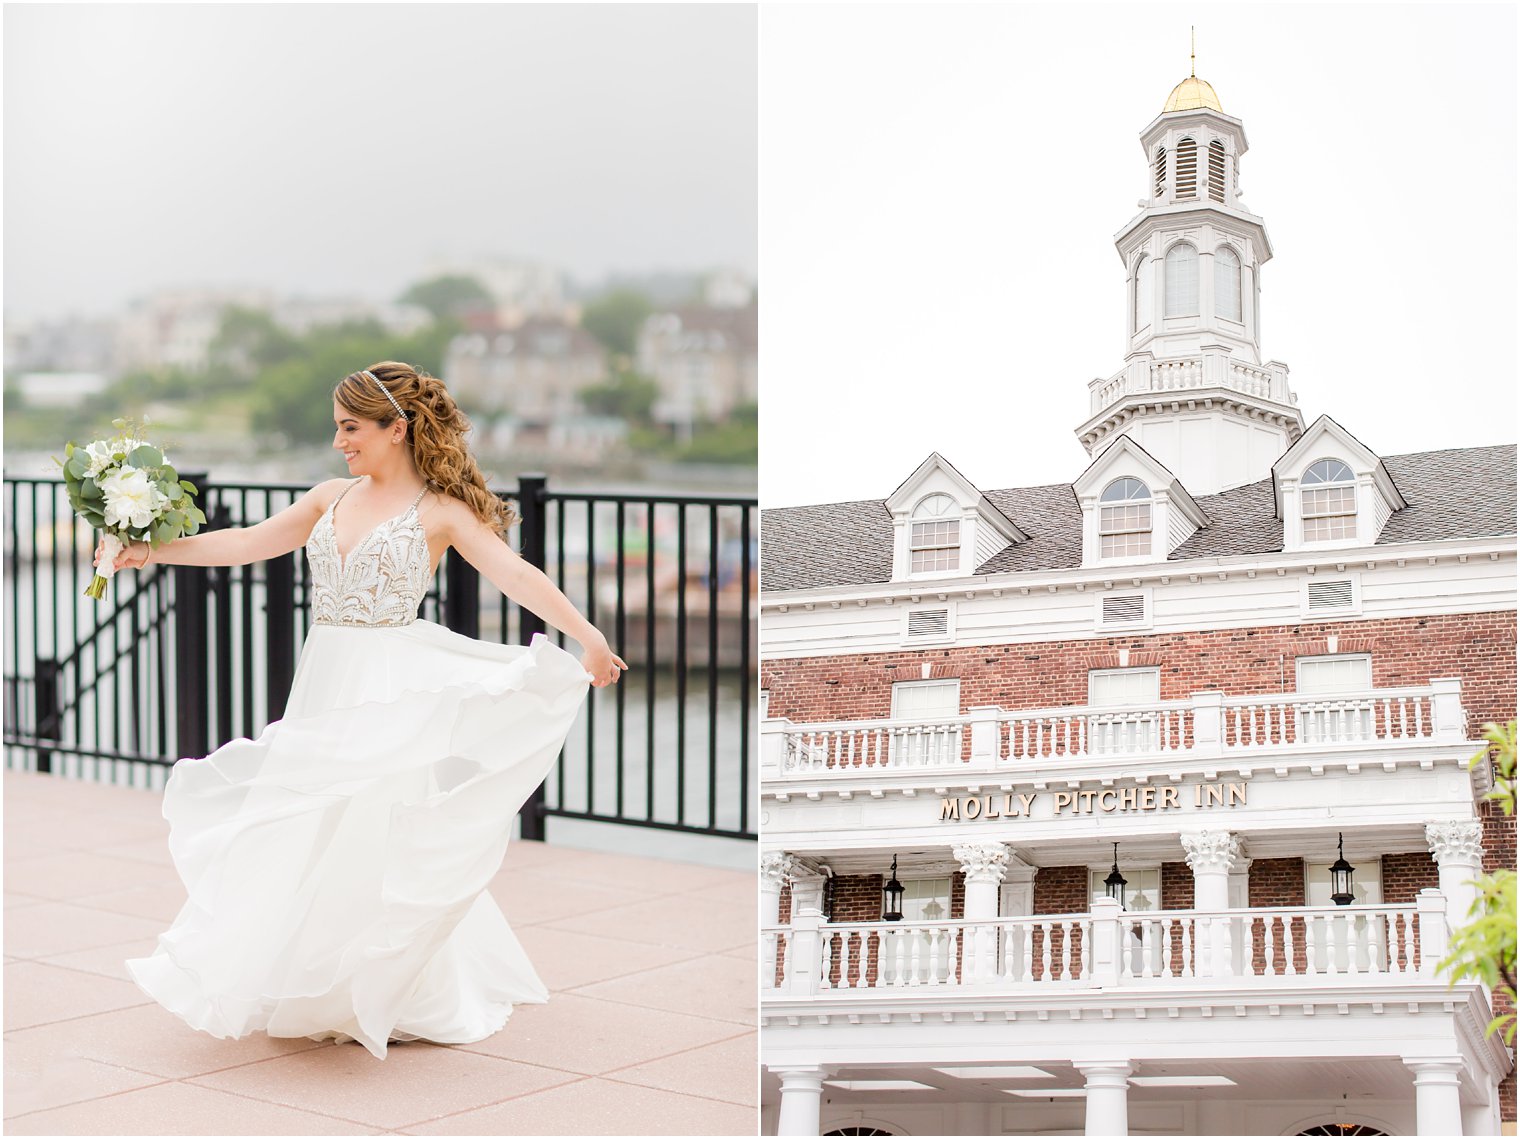 Bride twirling in Hayley Paige dress at Molly Pitcher Inn